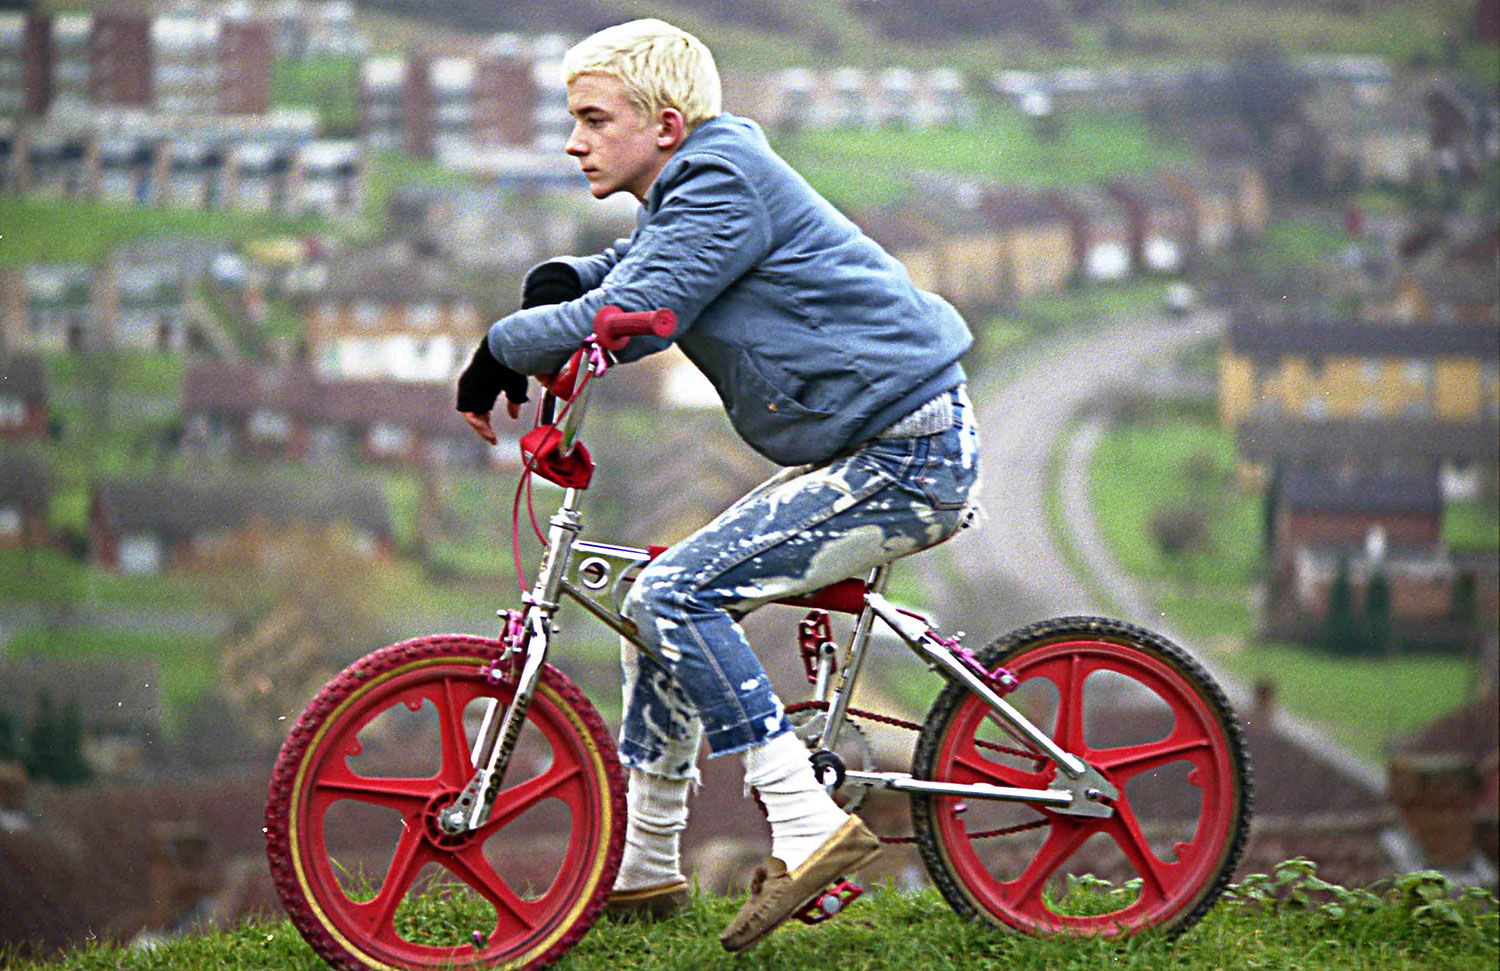 Gavin Watson, Neville Watson blond with BMX, from Oh! What Fun We Had